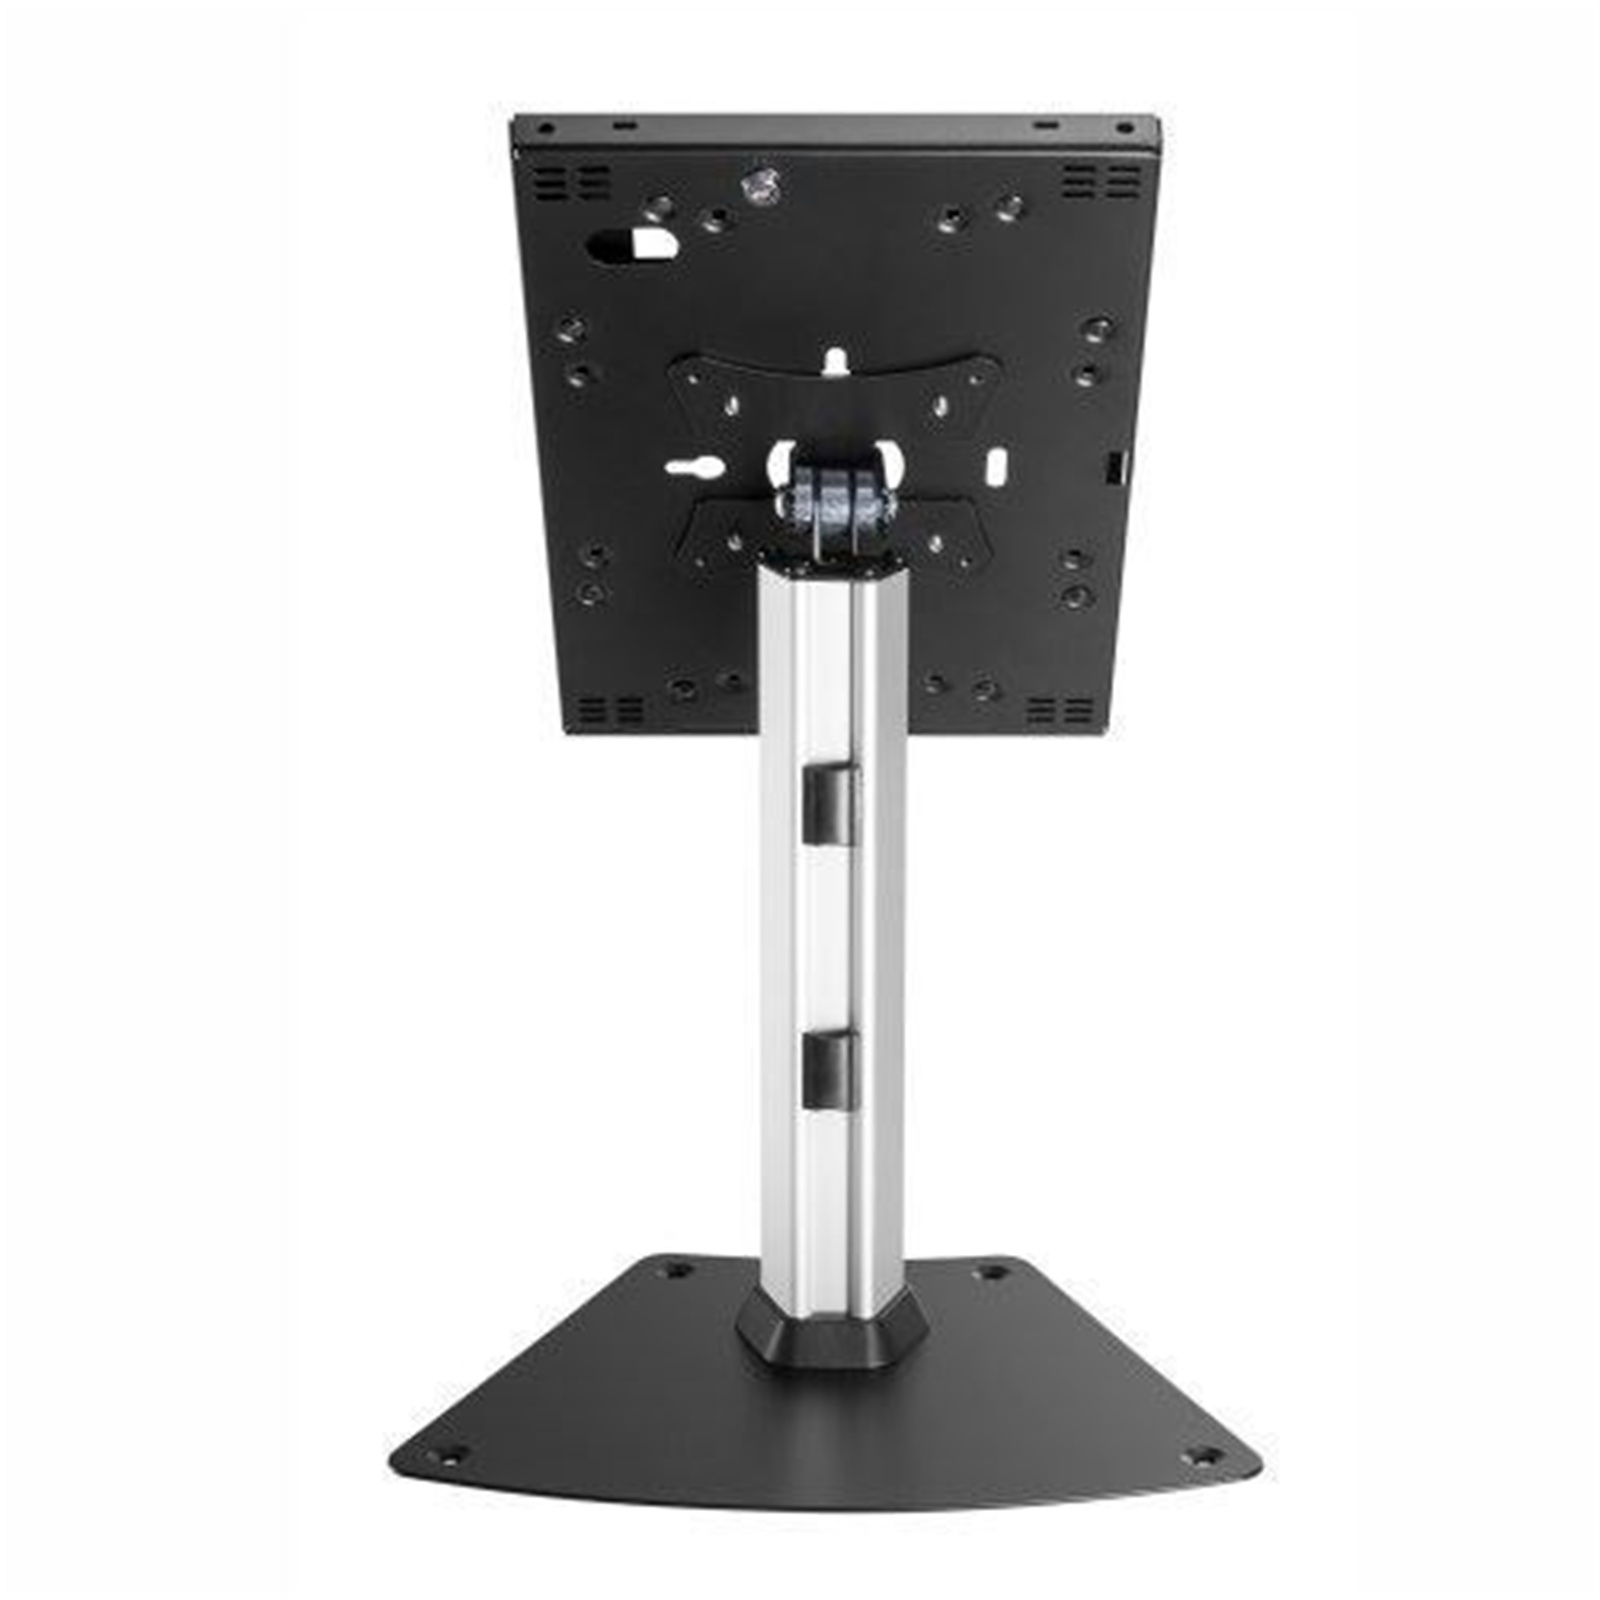 Anti-theft Tablet Kiosk Floor Stand with Aluminum Base Supplier and  Manufacturer- LUMI